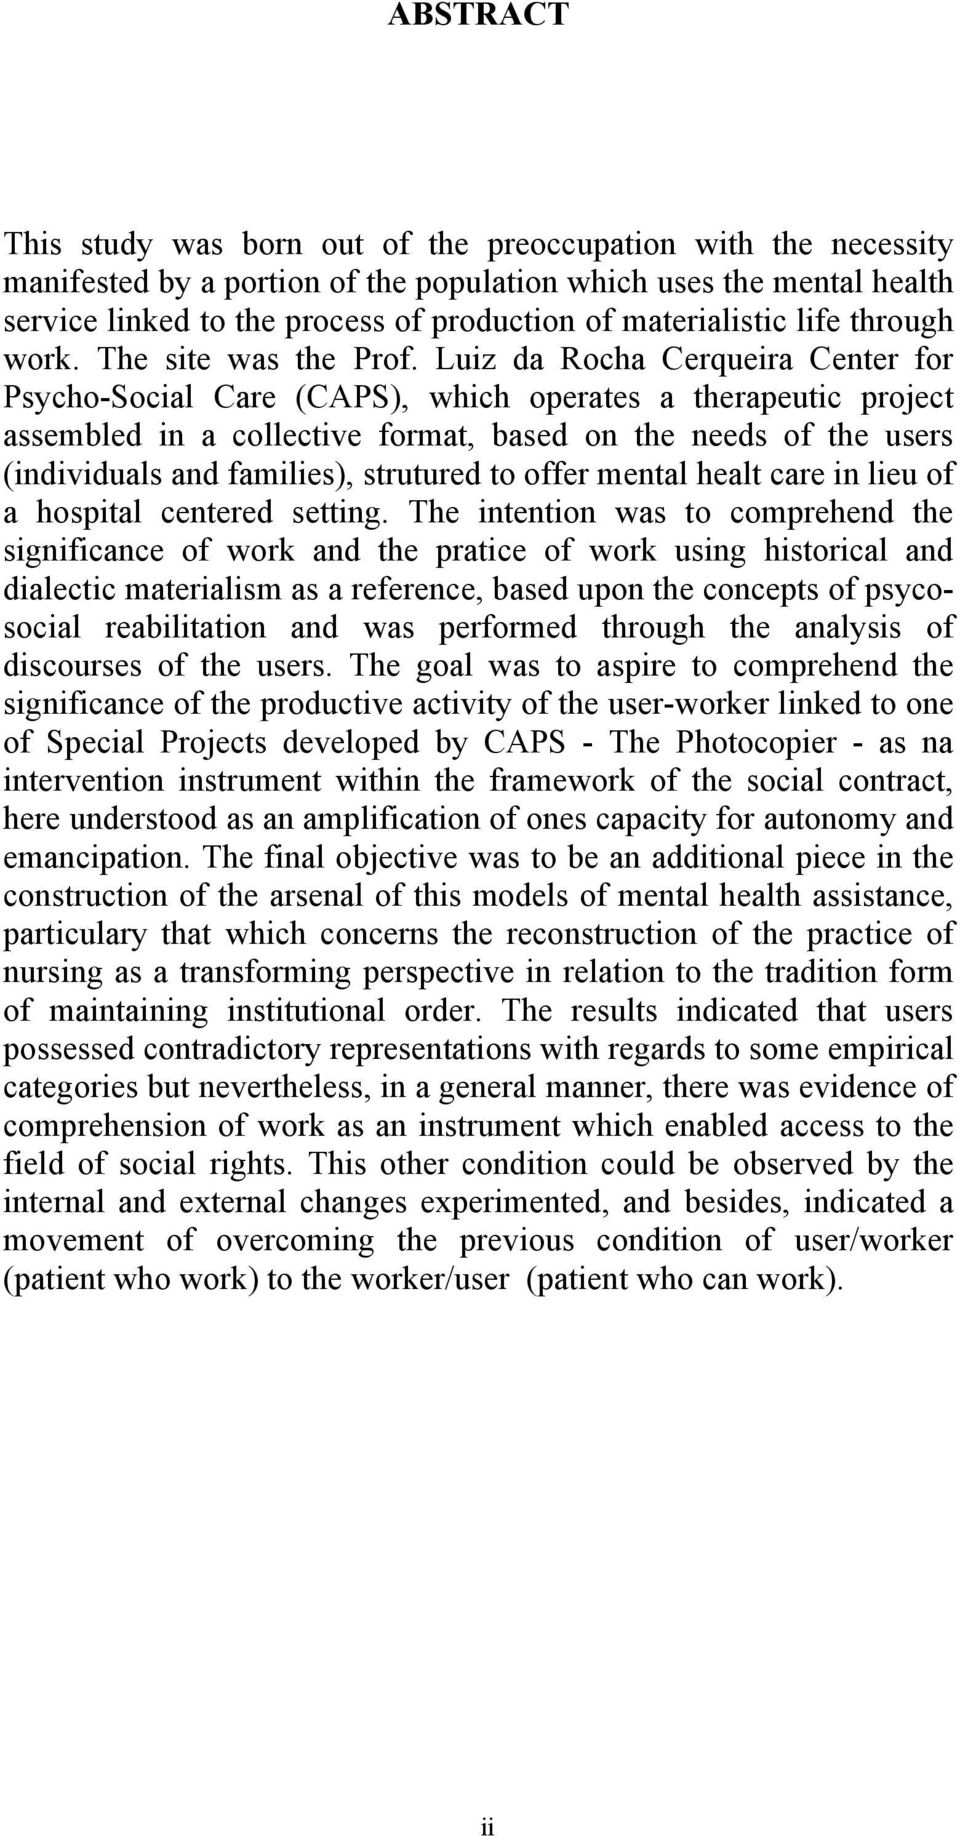 Luiz da Rocha Cerqueira Center for Psycho-Social Care (CAPS), which operates a therapeutic project assembled in a collective format, based on the needs of the users (individuals and families),